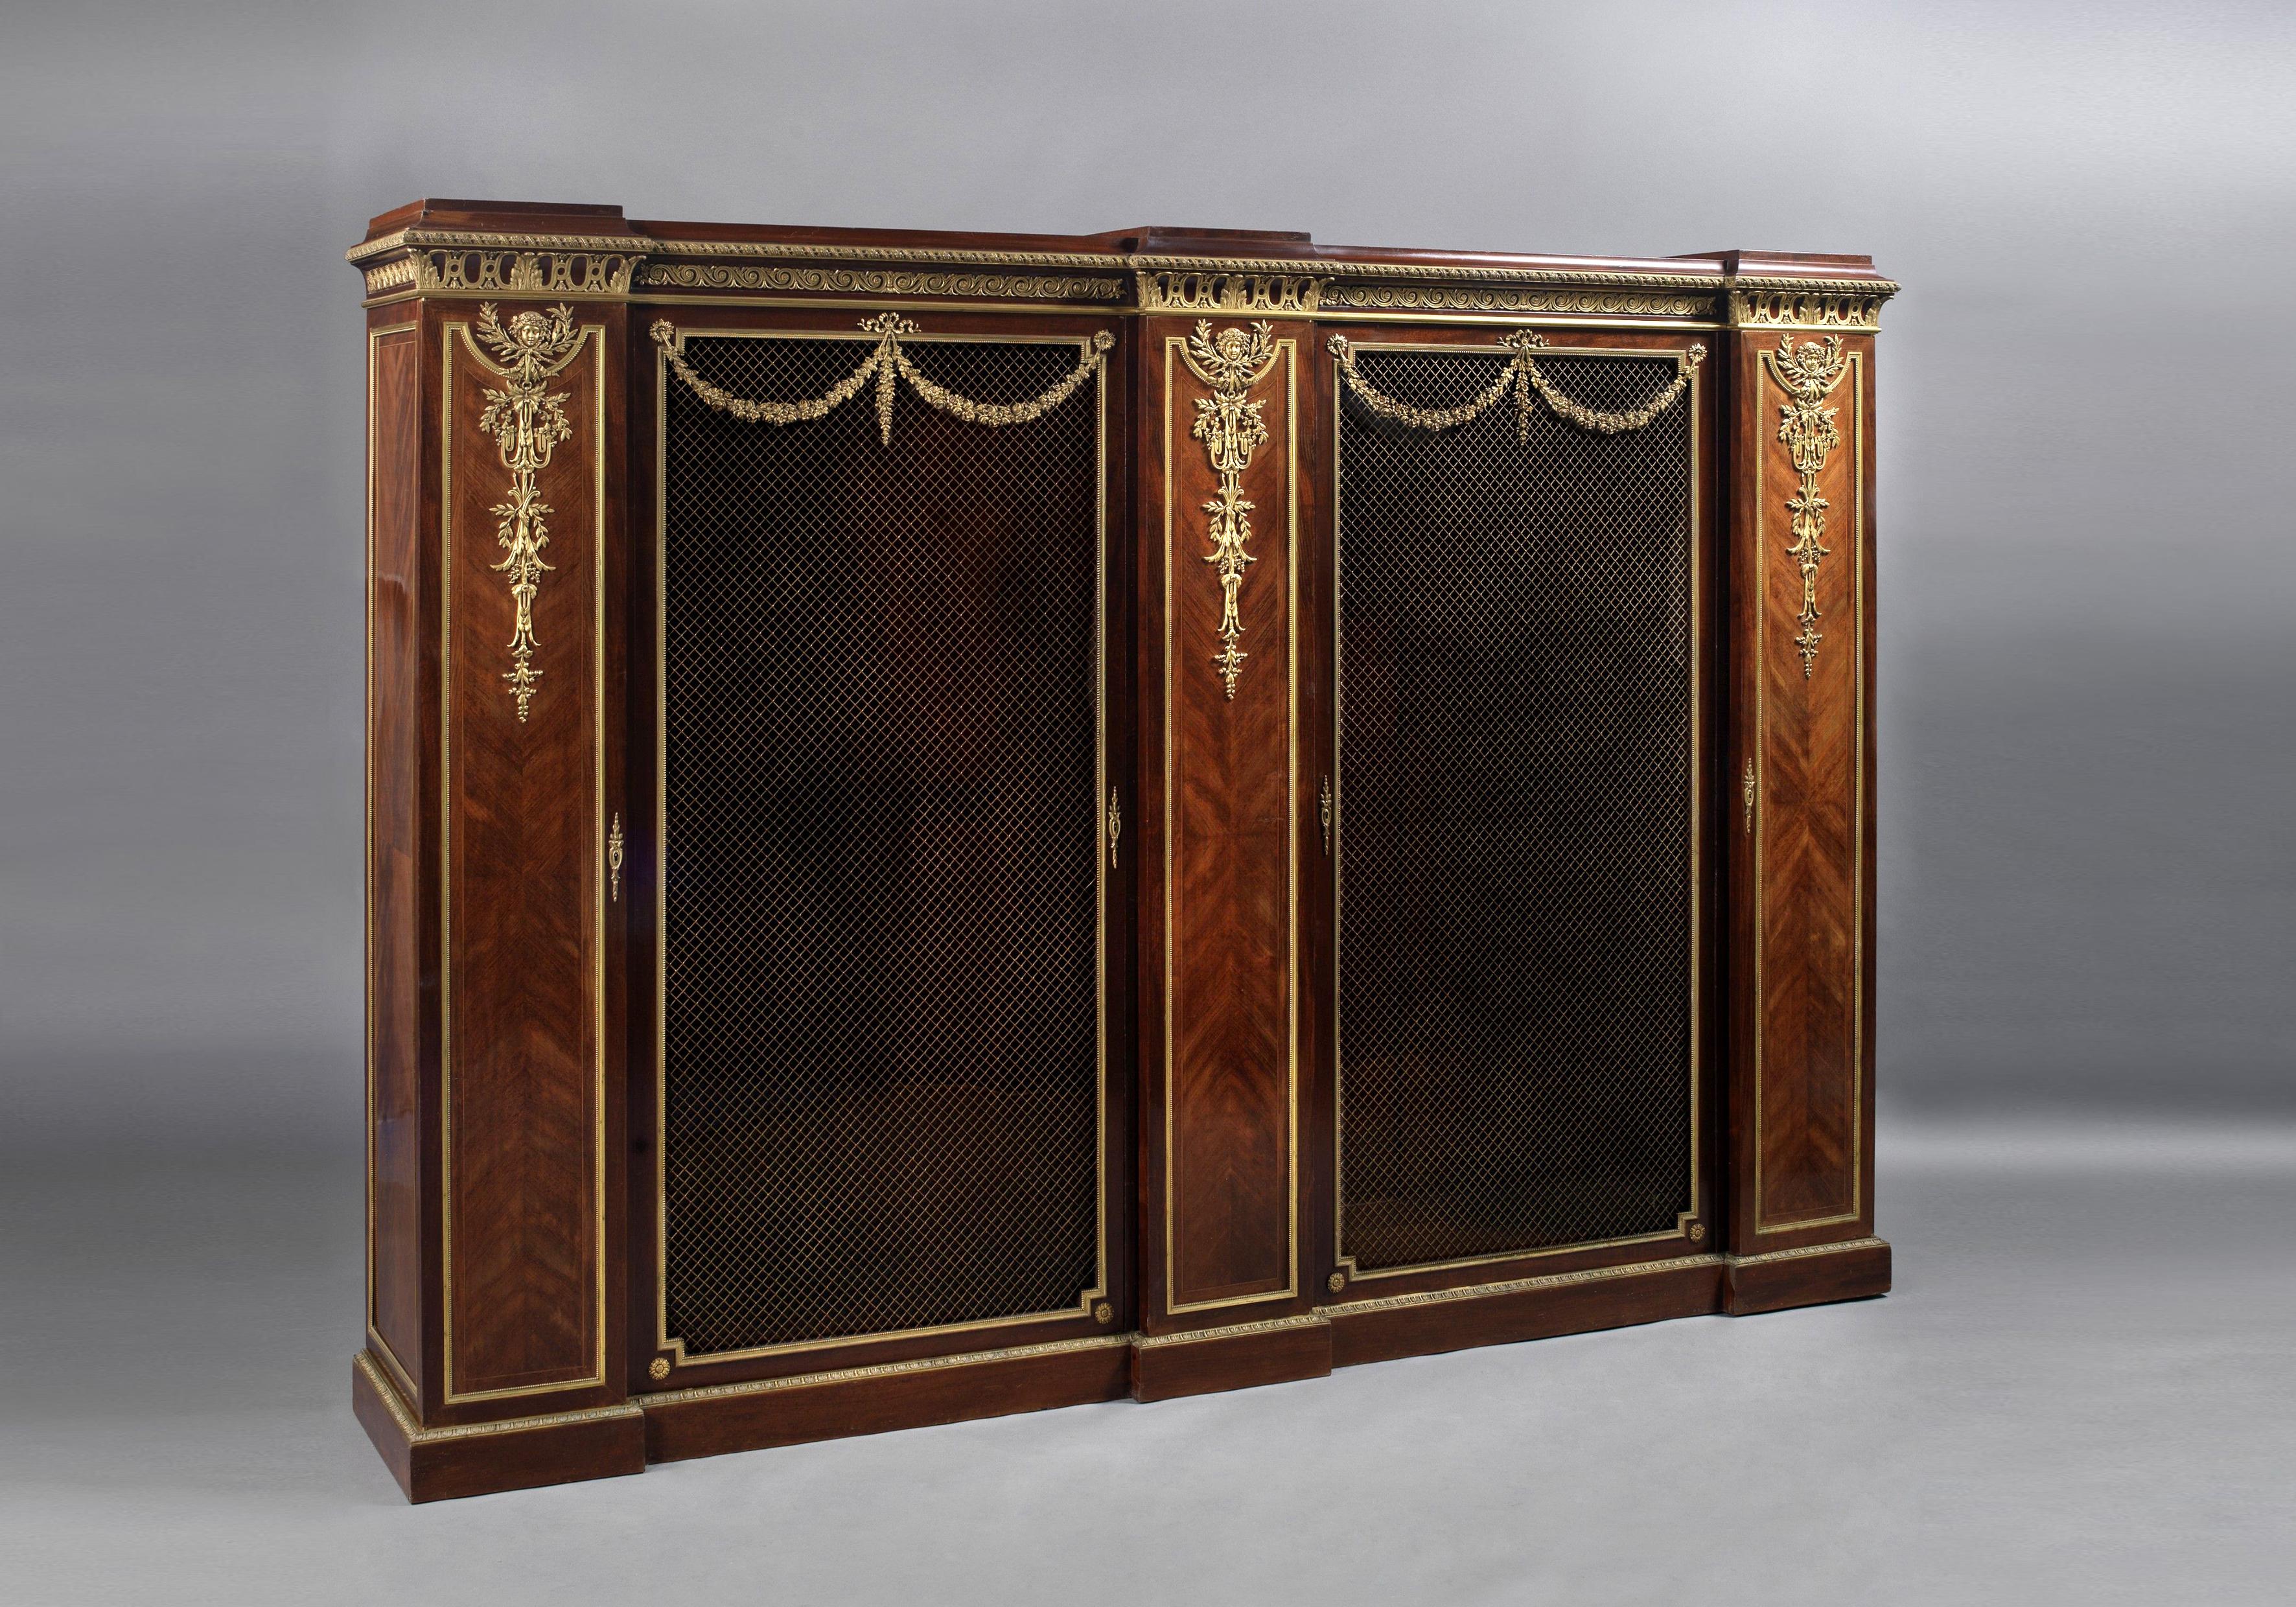 A fine gilt-bronze mounted mahogany and satine bookcase by François Linke.

French, circa 1890. 

Linke Index No. ‘1131’
Inscribed ‘F. Linke’ above the center right-hand door.
The reverse of the lockplates stamped 
‘CT